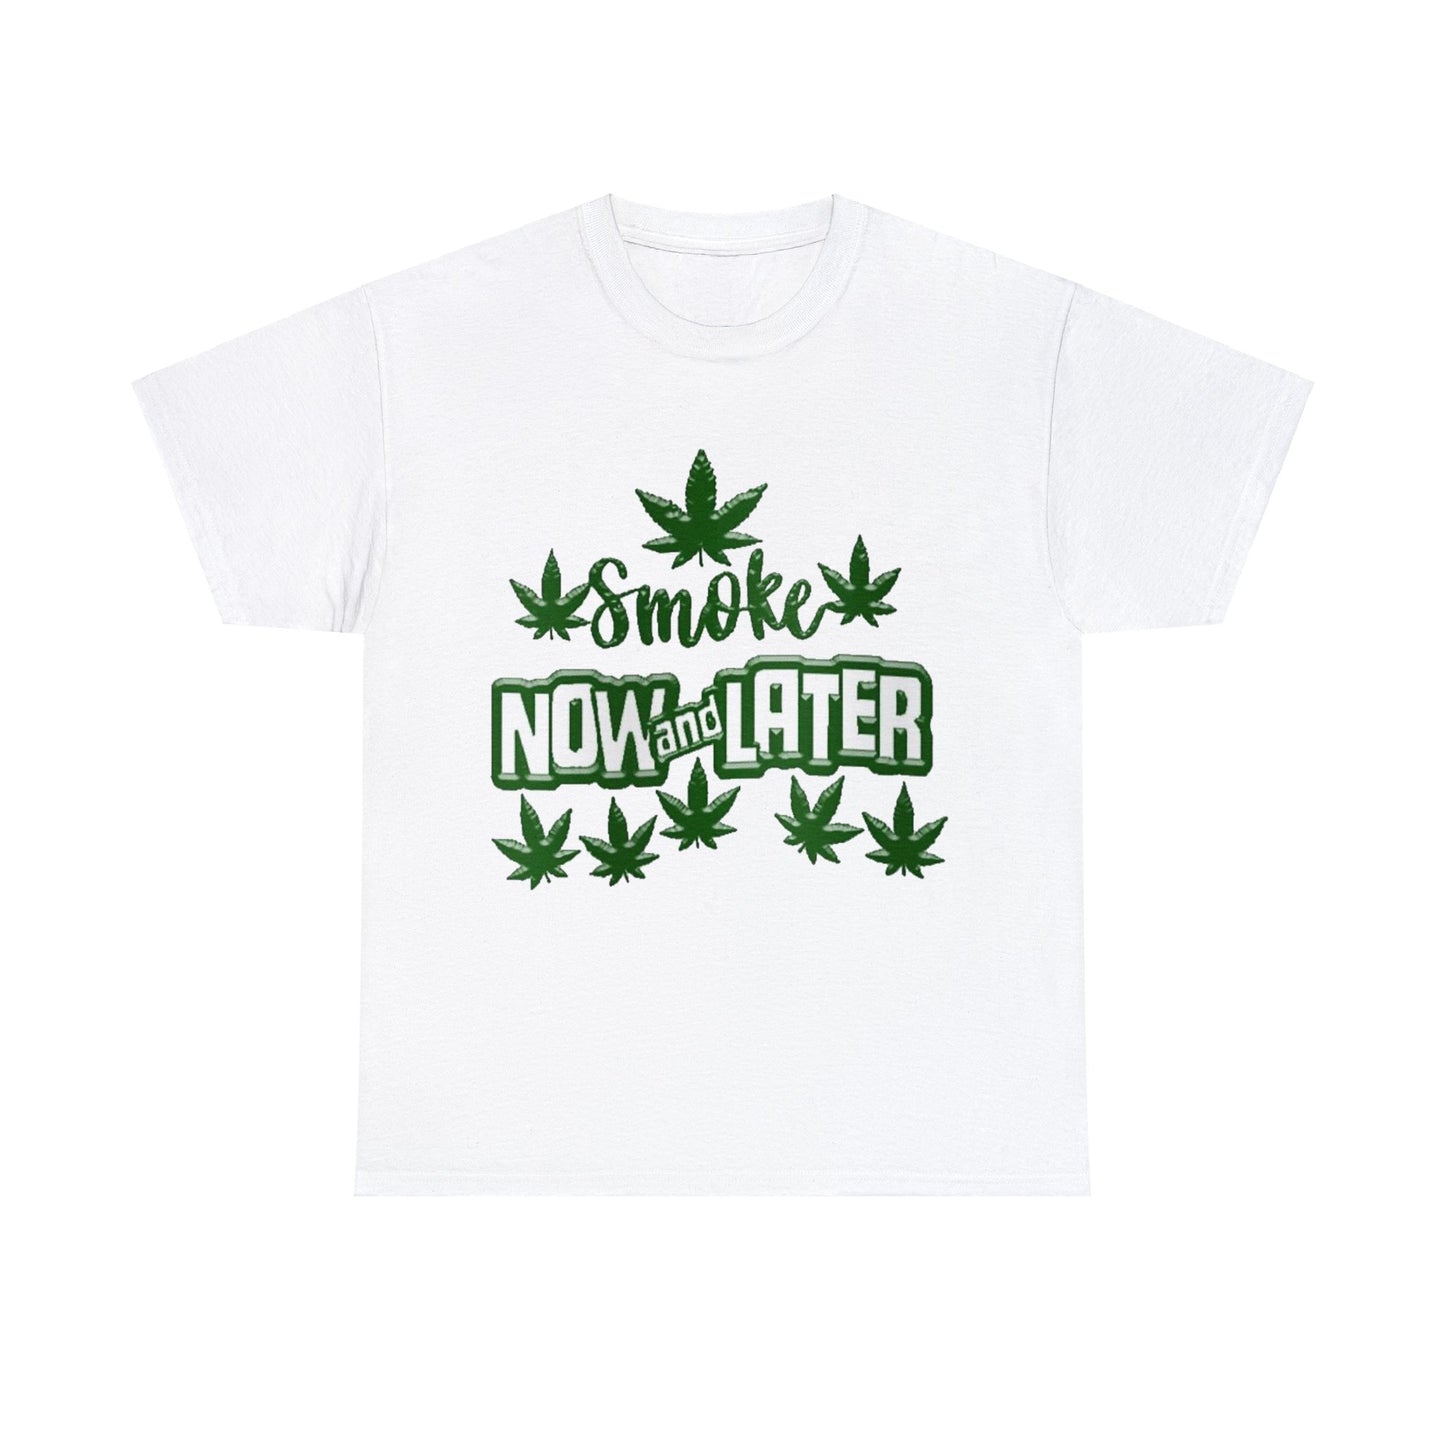 Now and Later Tee